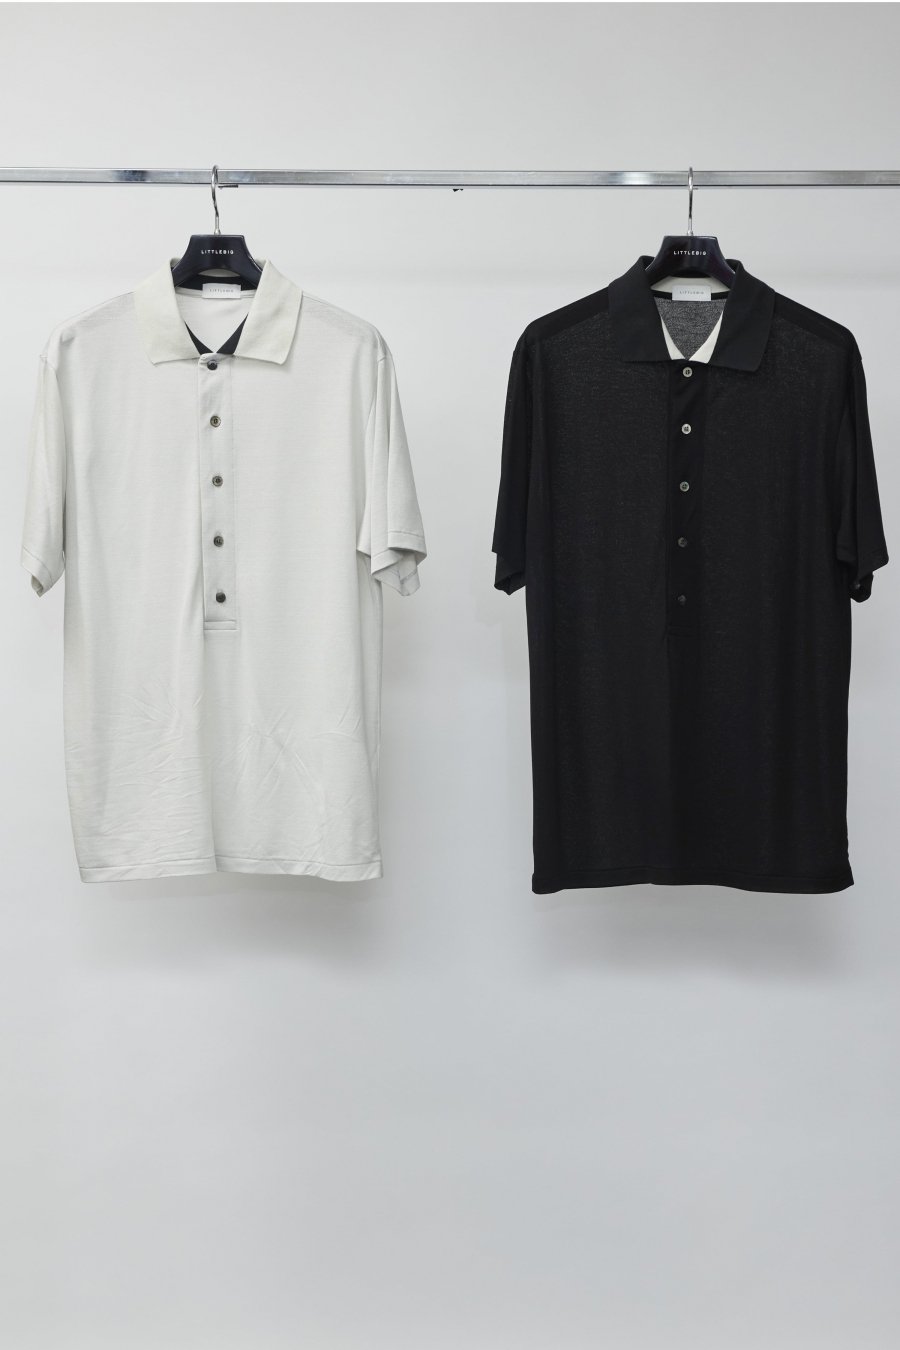 LITTLEBIG  S/S Polo SH（Black）<img class='new_mark_img2' src='https://img.shop-pro.jp/img/new/icons15.gif' style='border:none;display:inline;margin:0px;padding:0px;width:auto;' />